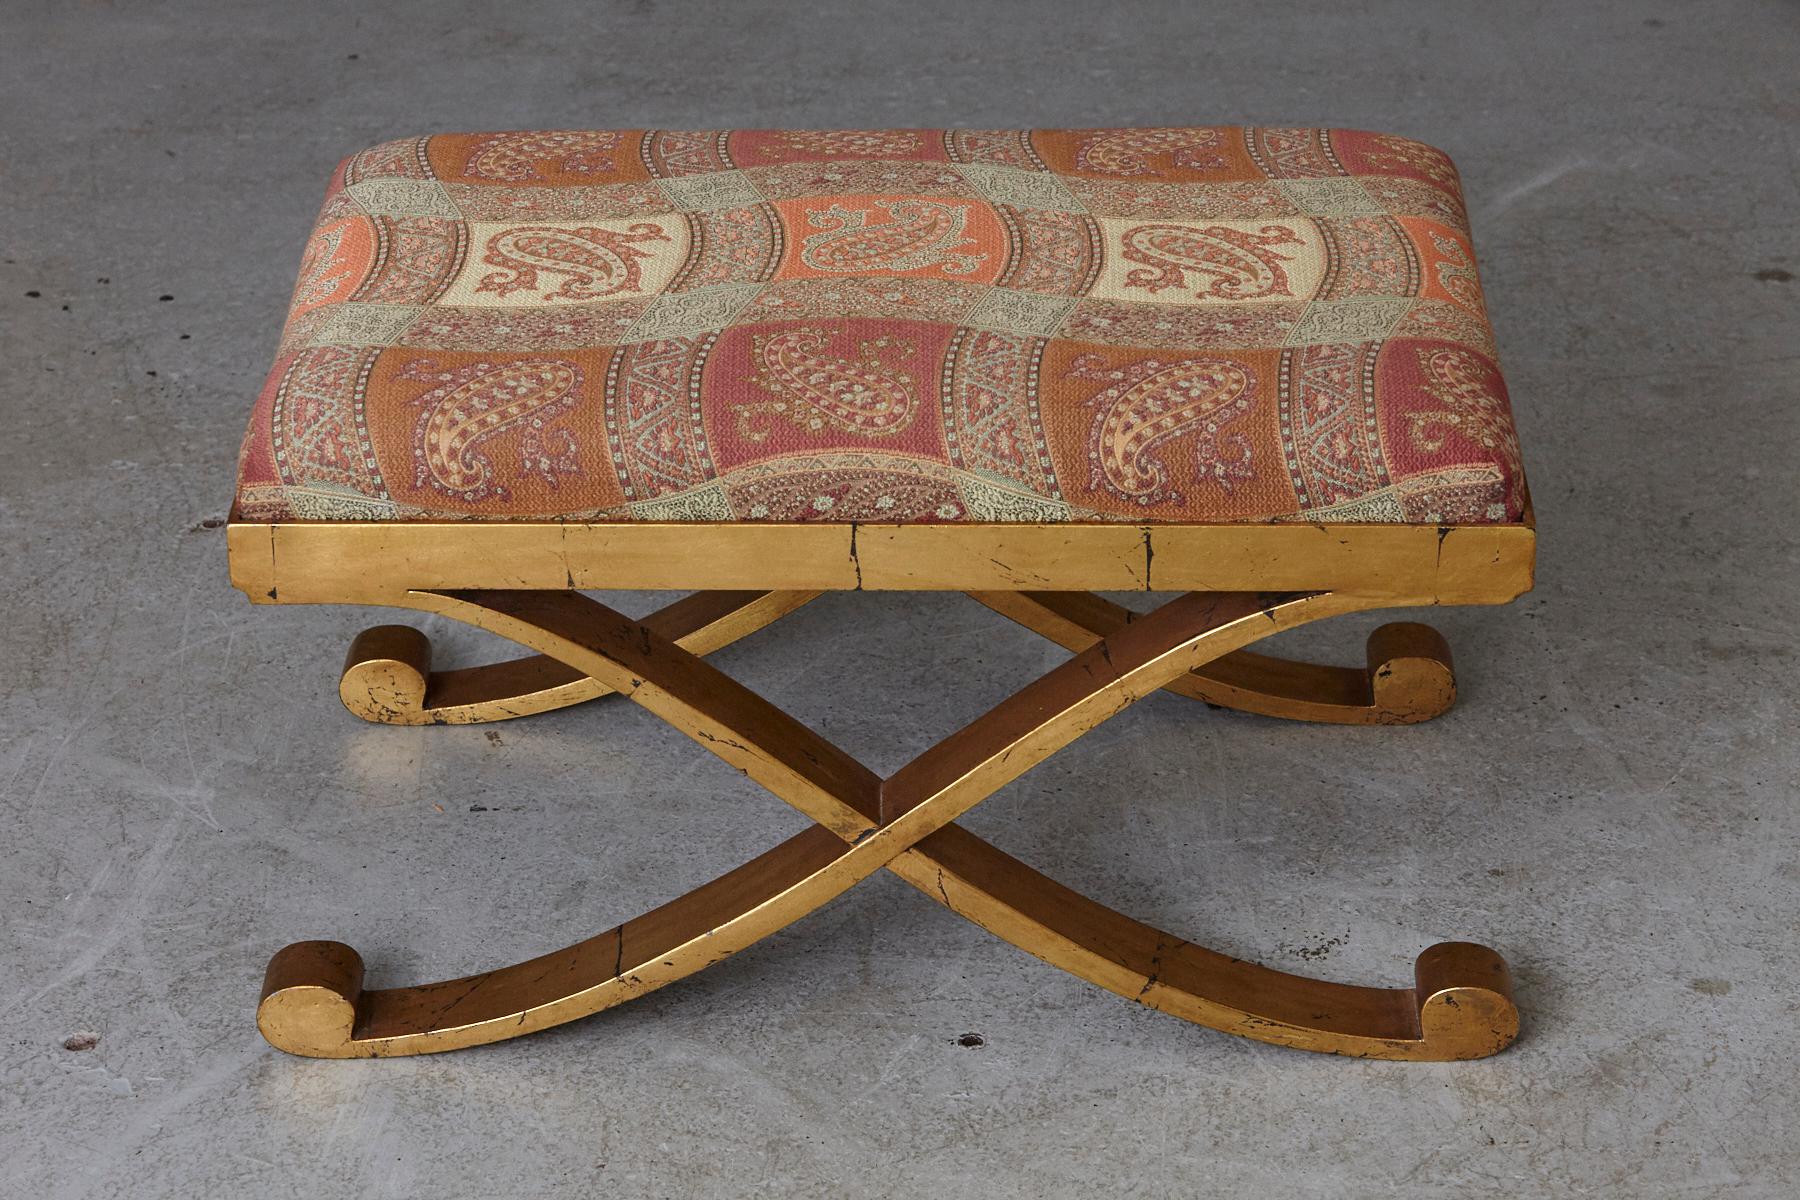 American Gild Patinated Metal Bench with Cross Legs Upholstered in Paisley Fabric